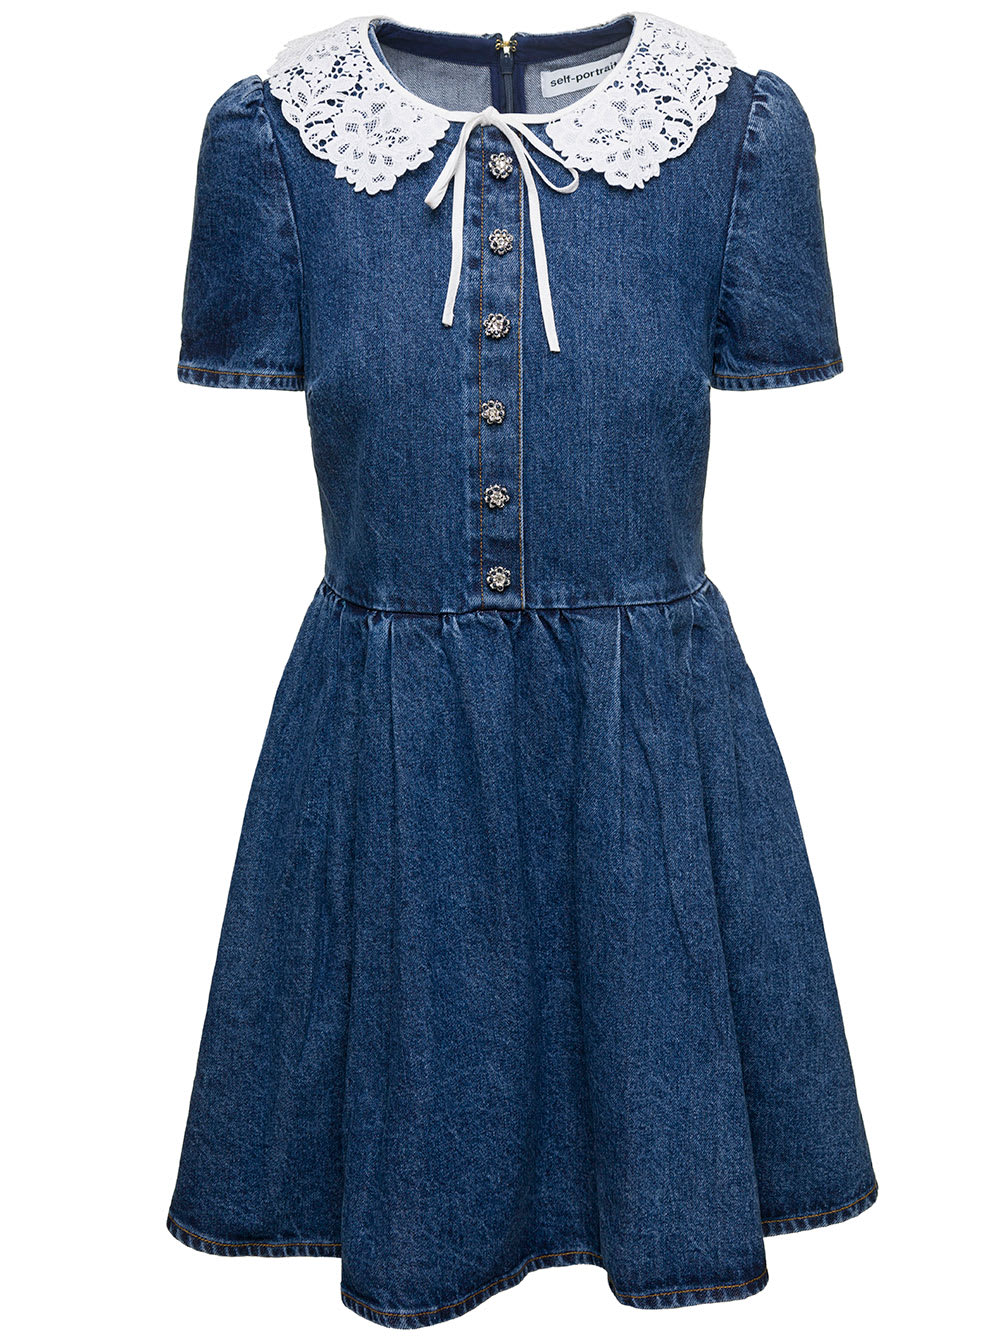 SELF-PORTRAIT MINI BLUE DRESS WITH PETER-PAN COLLAR AND FLARE SKIRT IN COTTON DENIM WOMAN